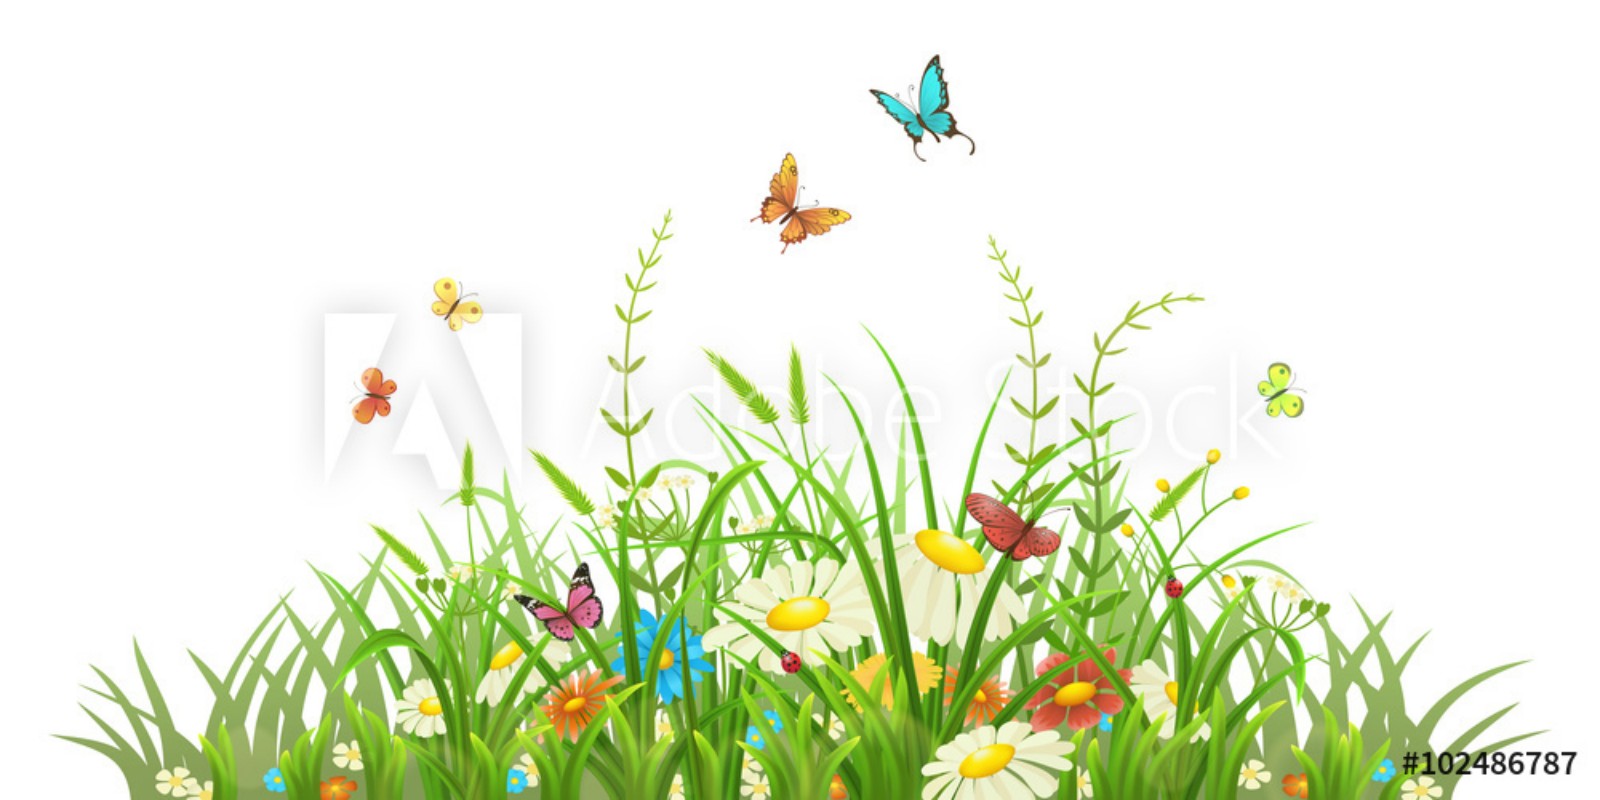 Image de Spring green grass with flowers and butterflies on white background